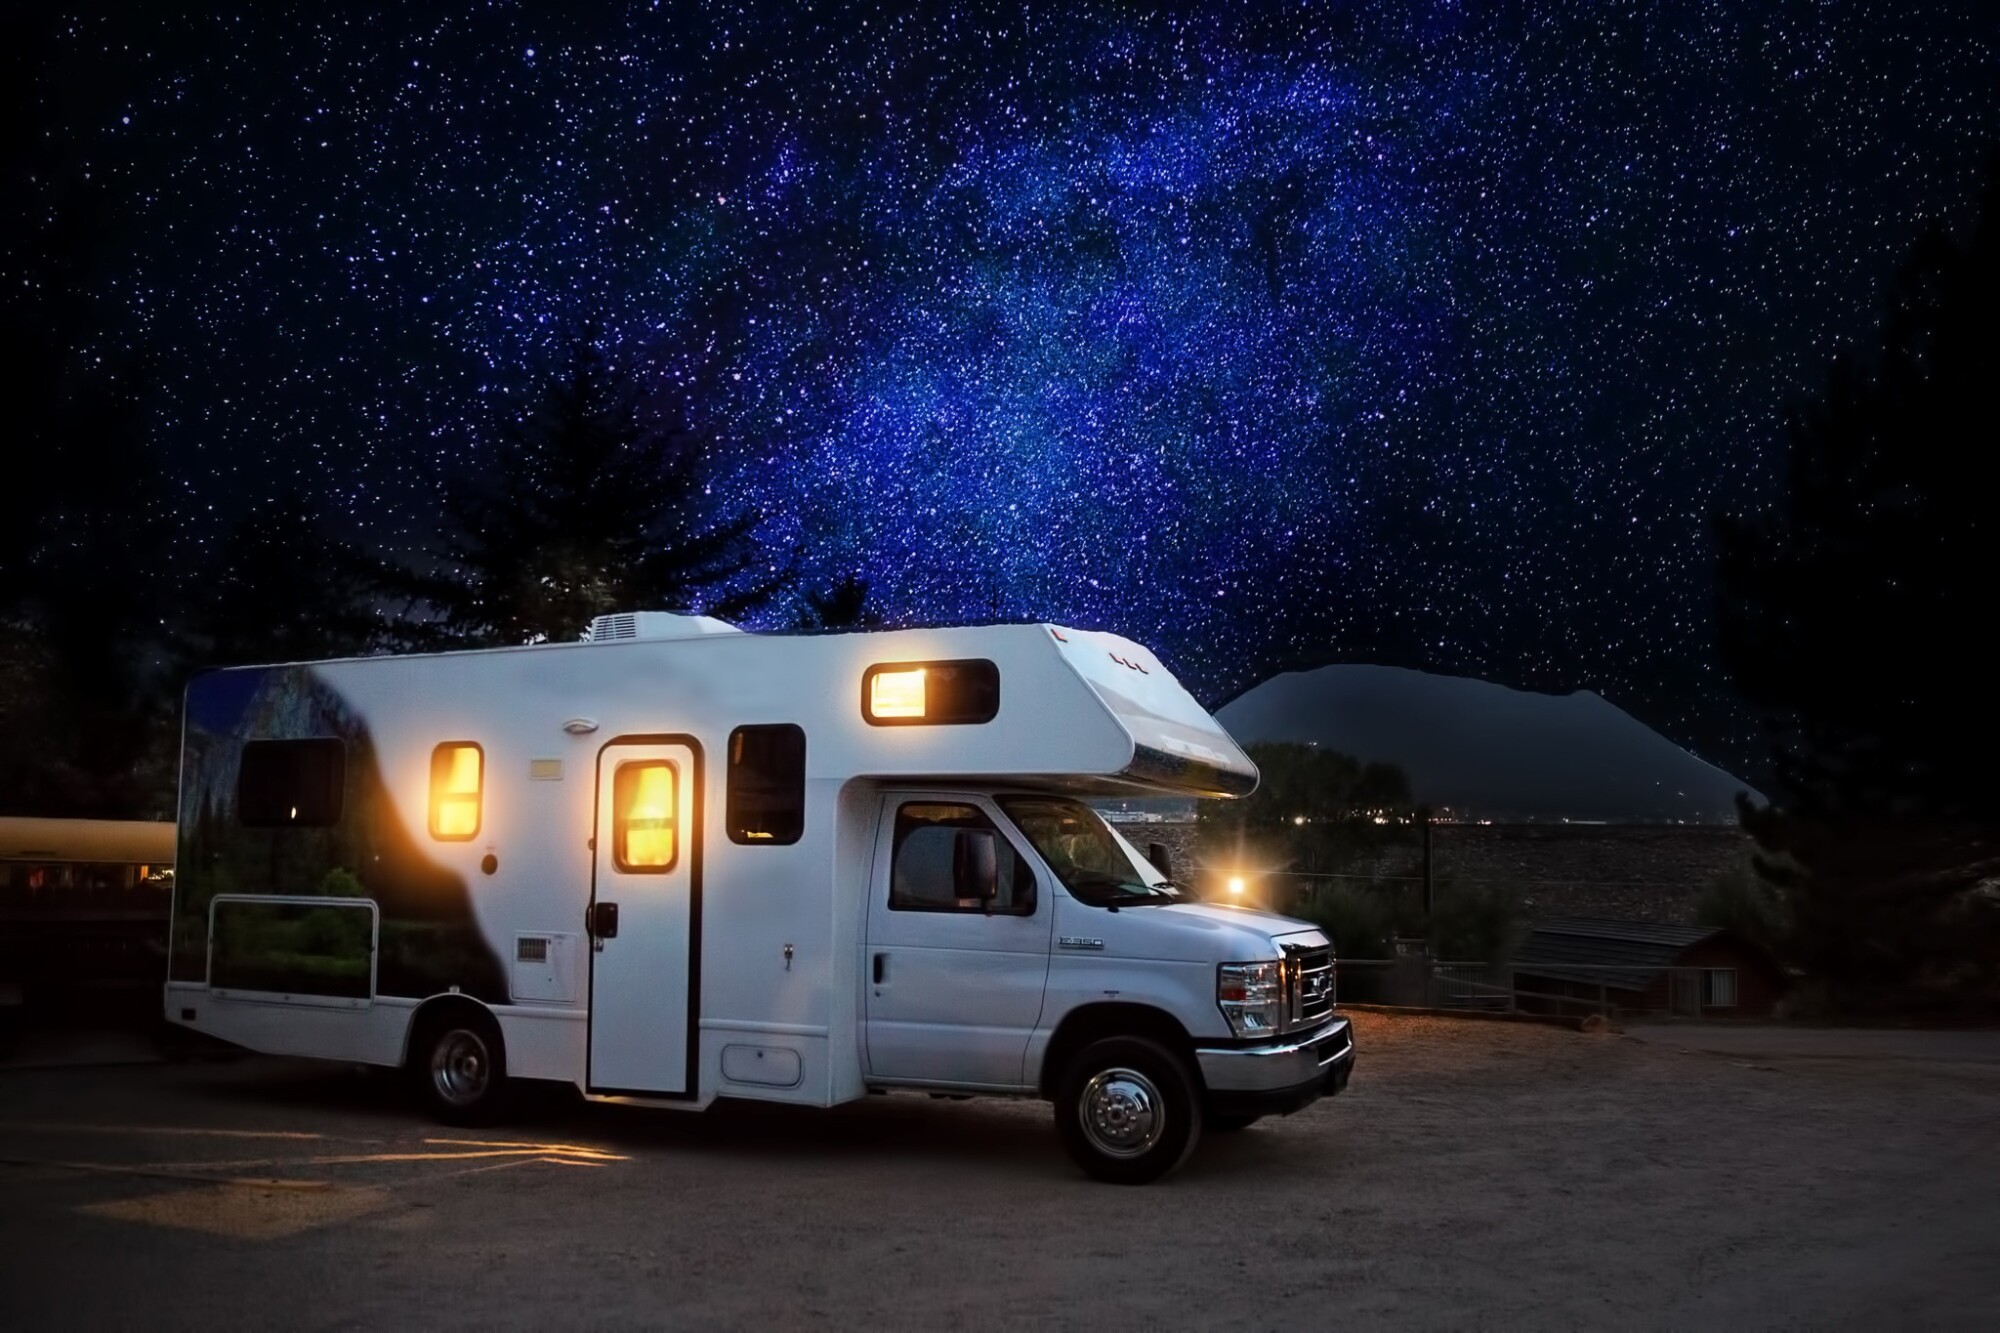 Solar Power for Your RV